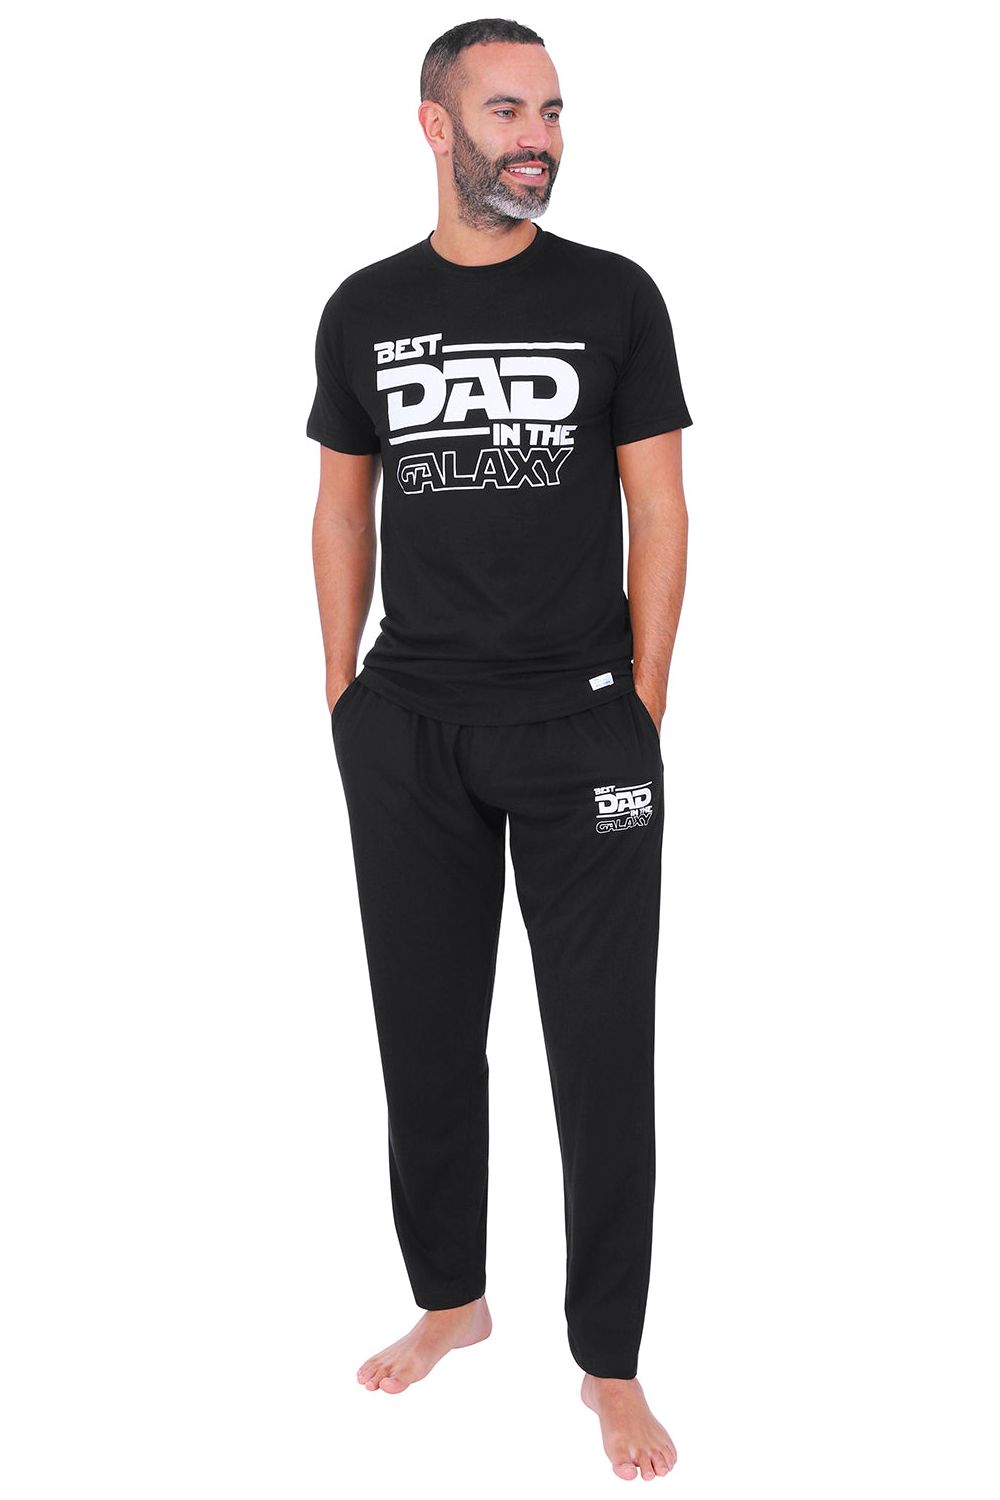 Mens 'Best Dad In The Galaxy' Long Pyjamas Fathers Day